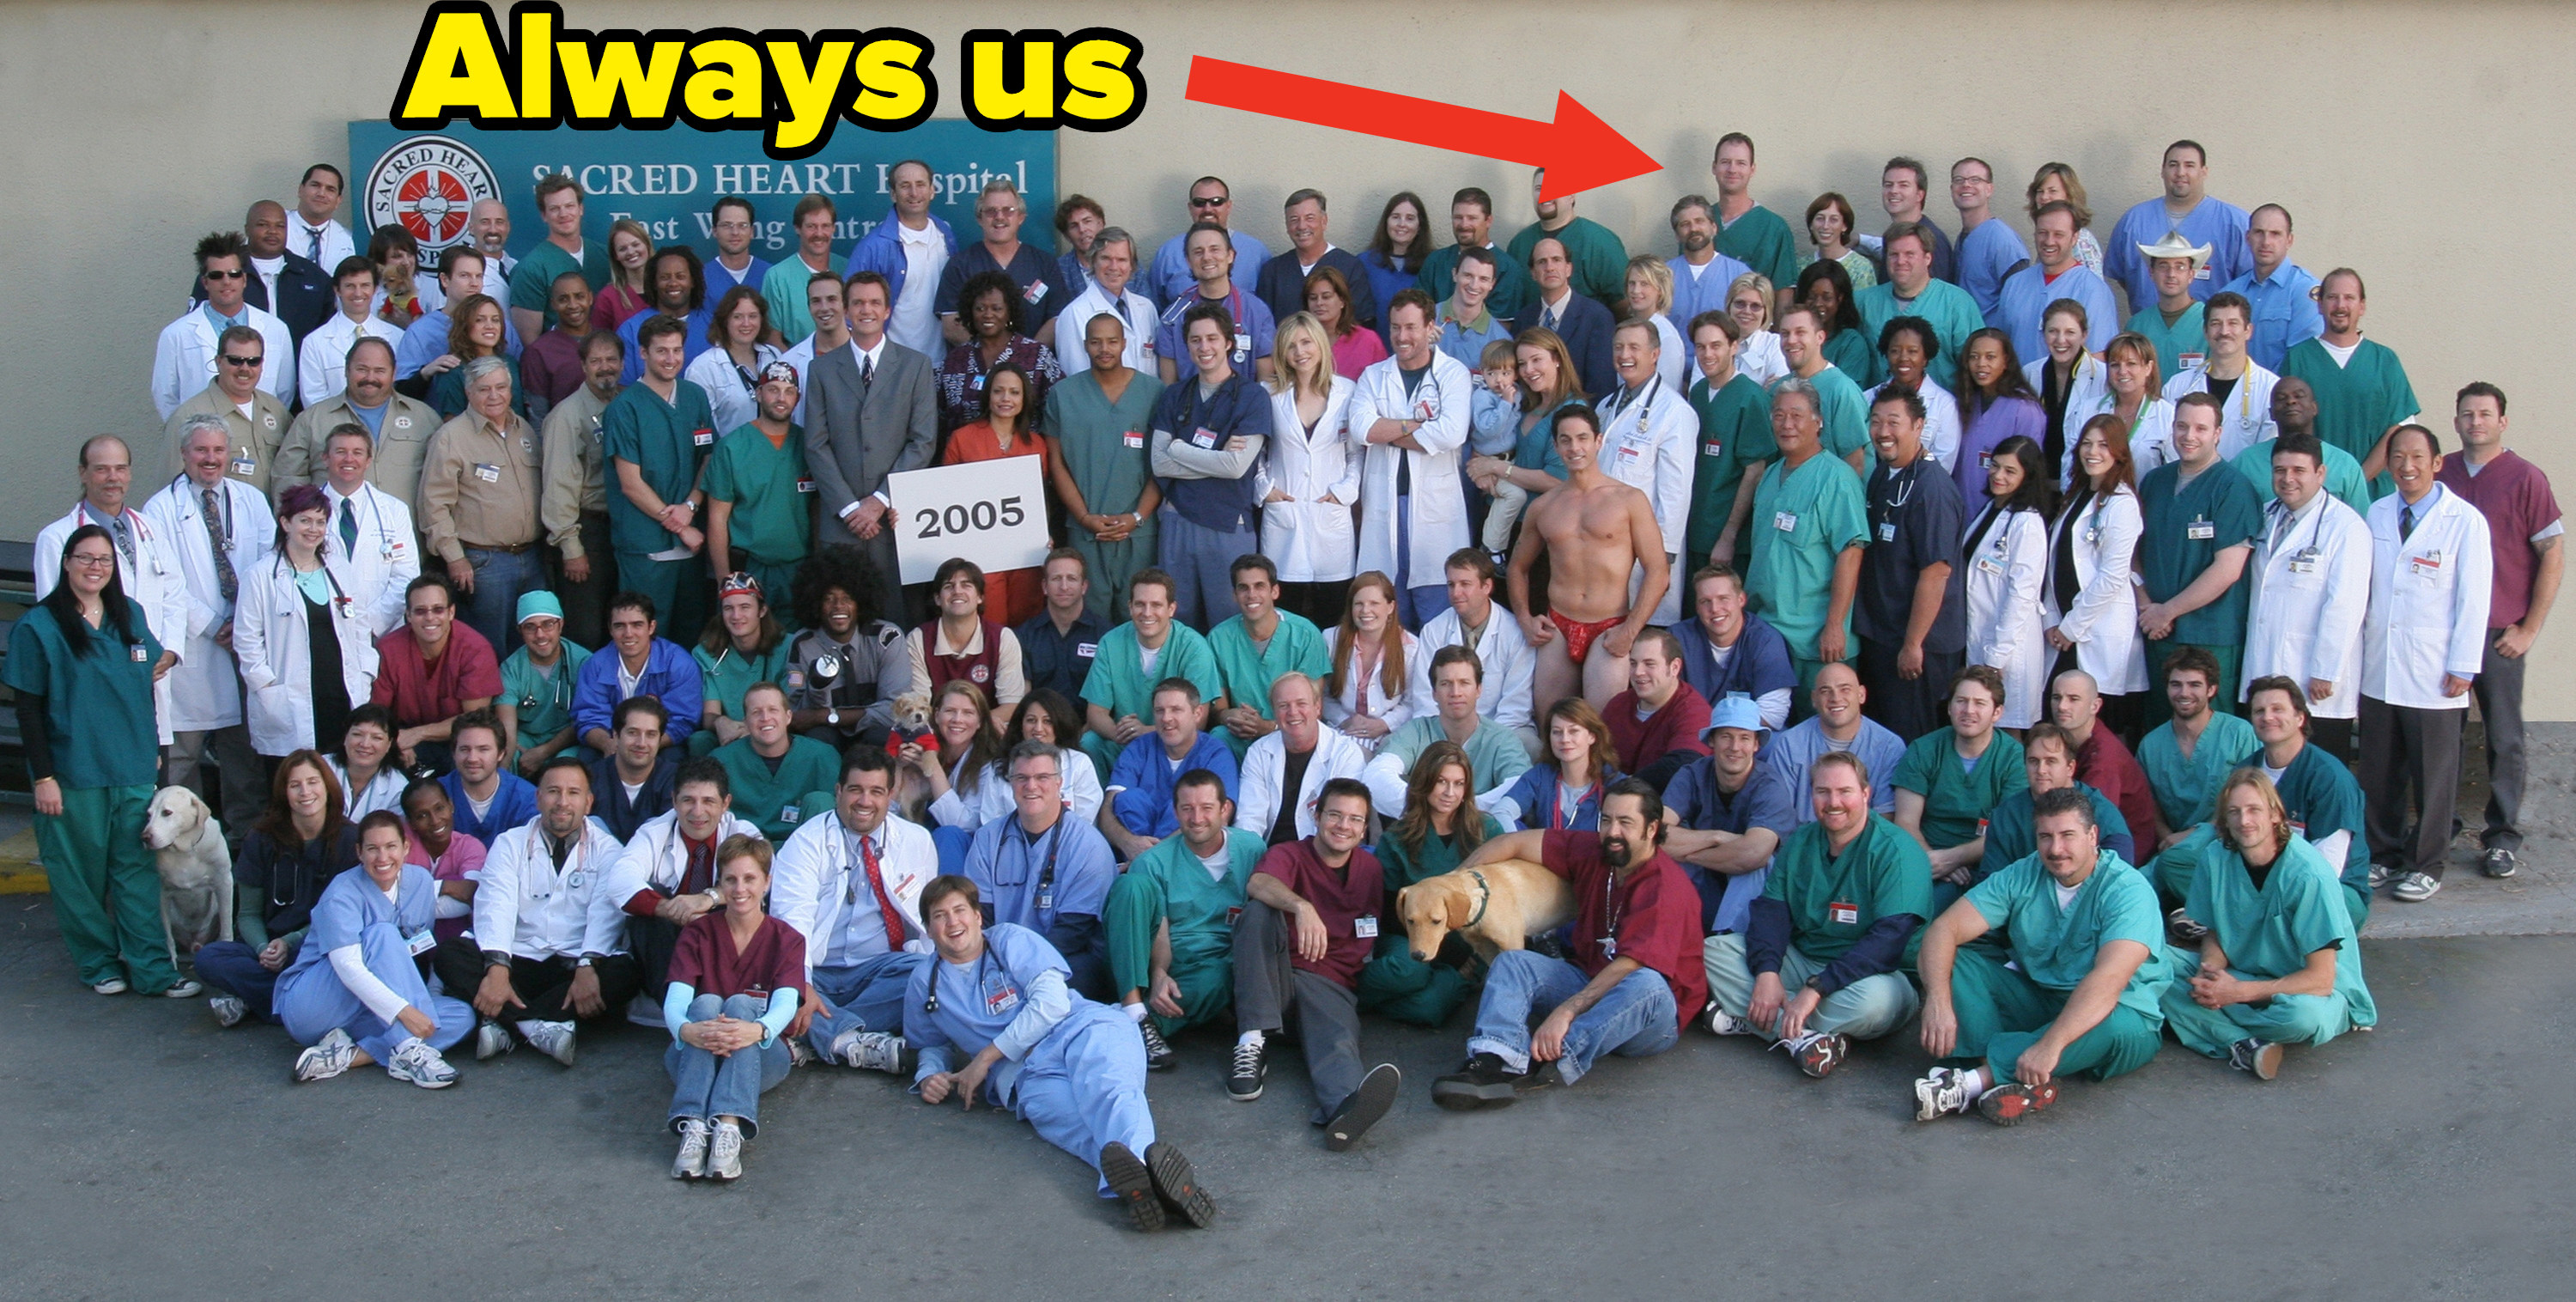 A group photo of all the staff at &quot;sacred heart&quot; – the hospital in Scrubs